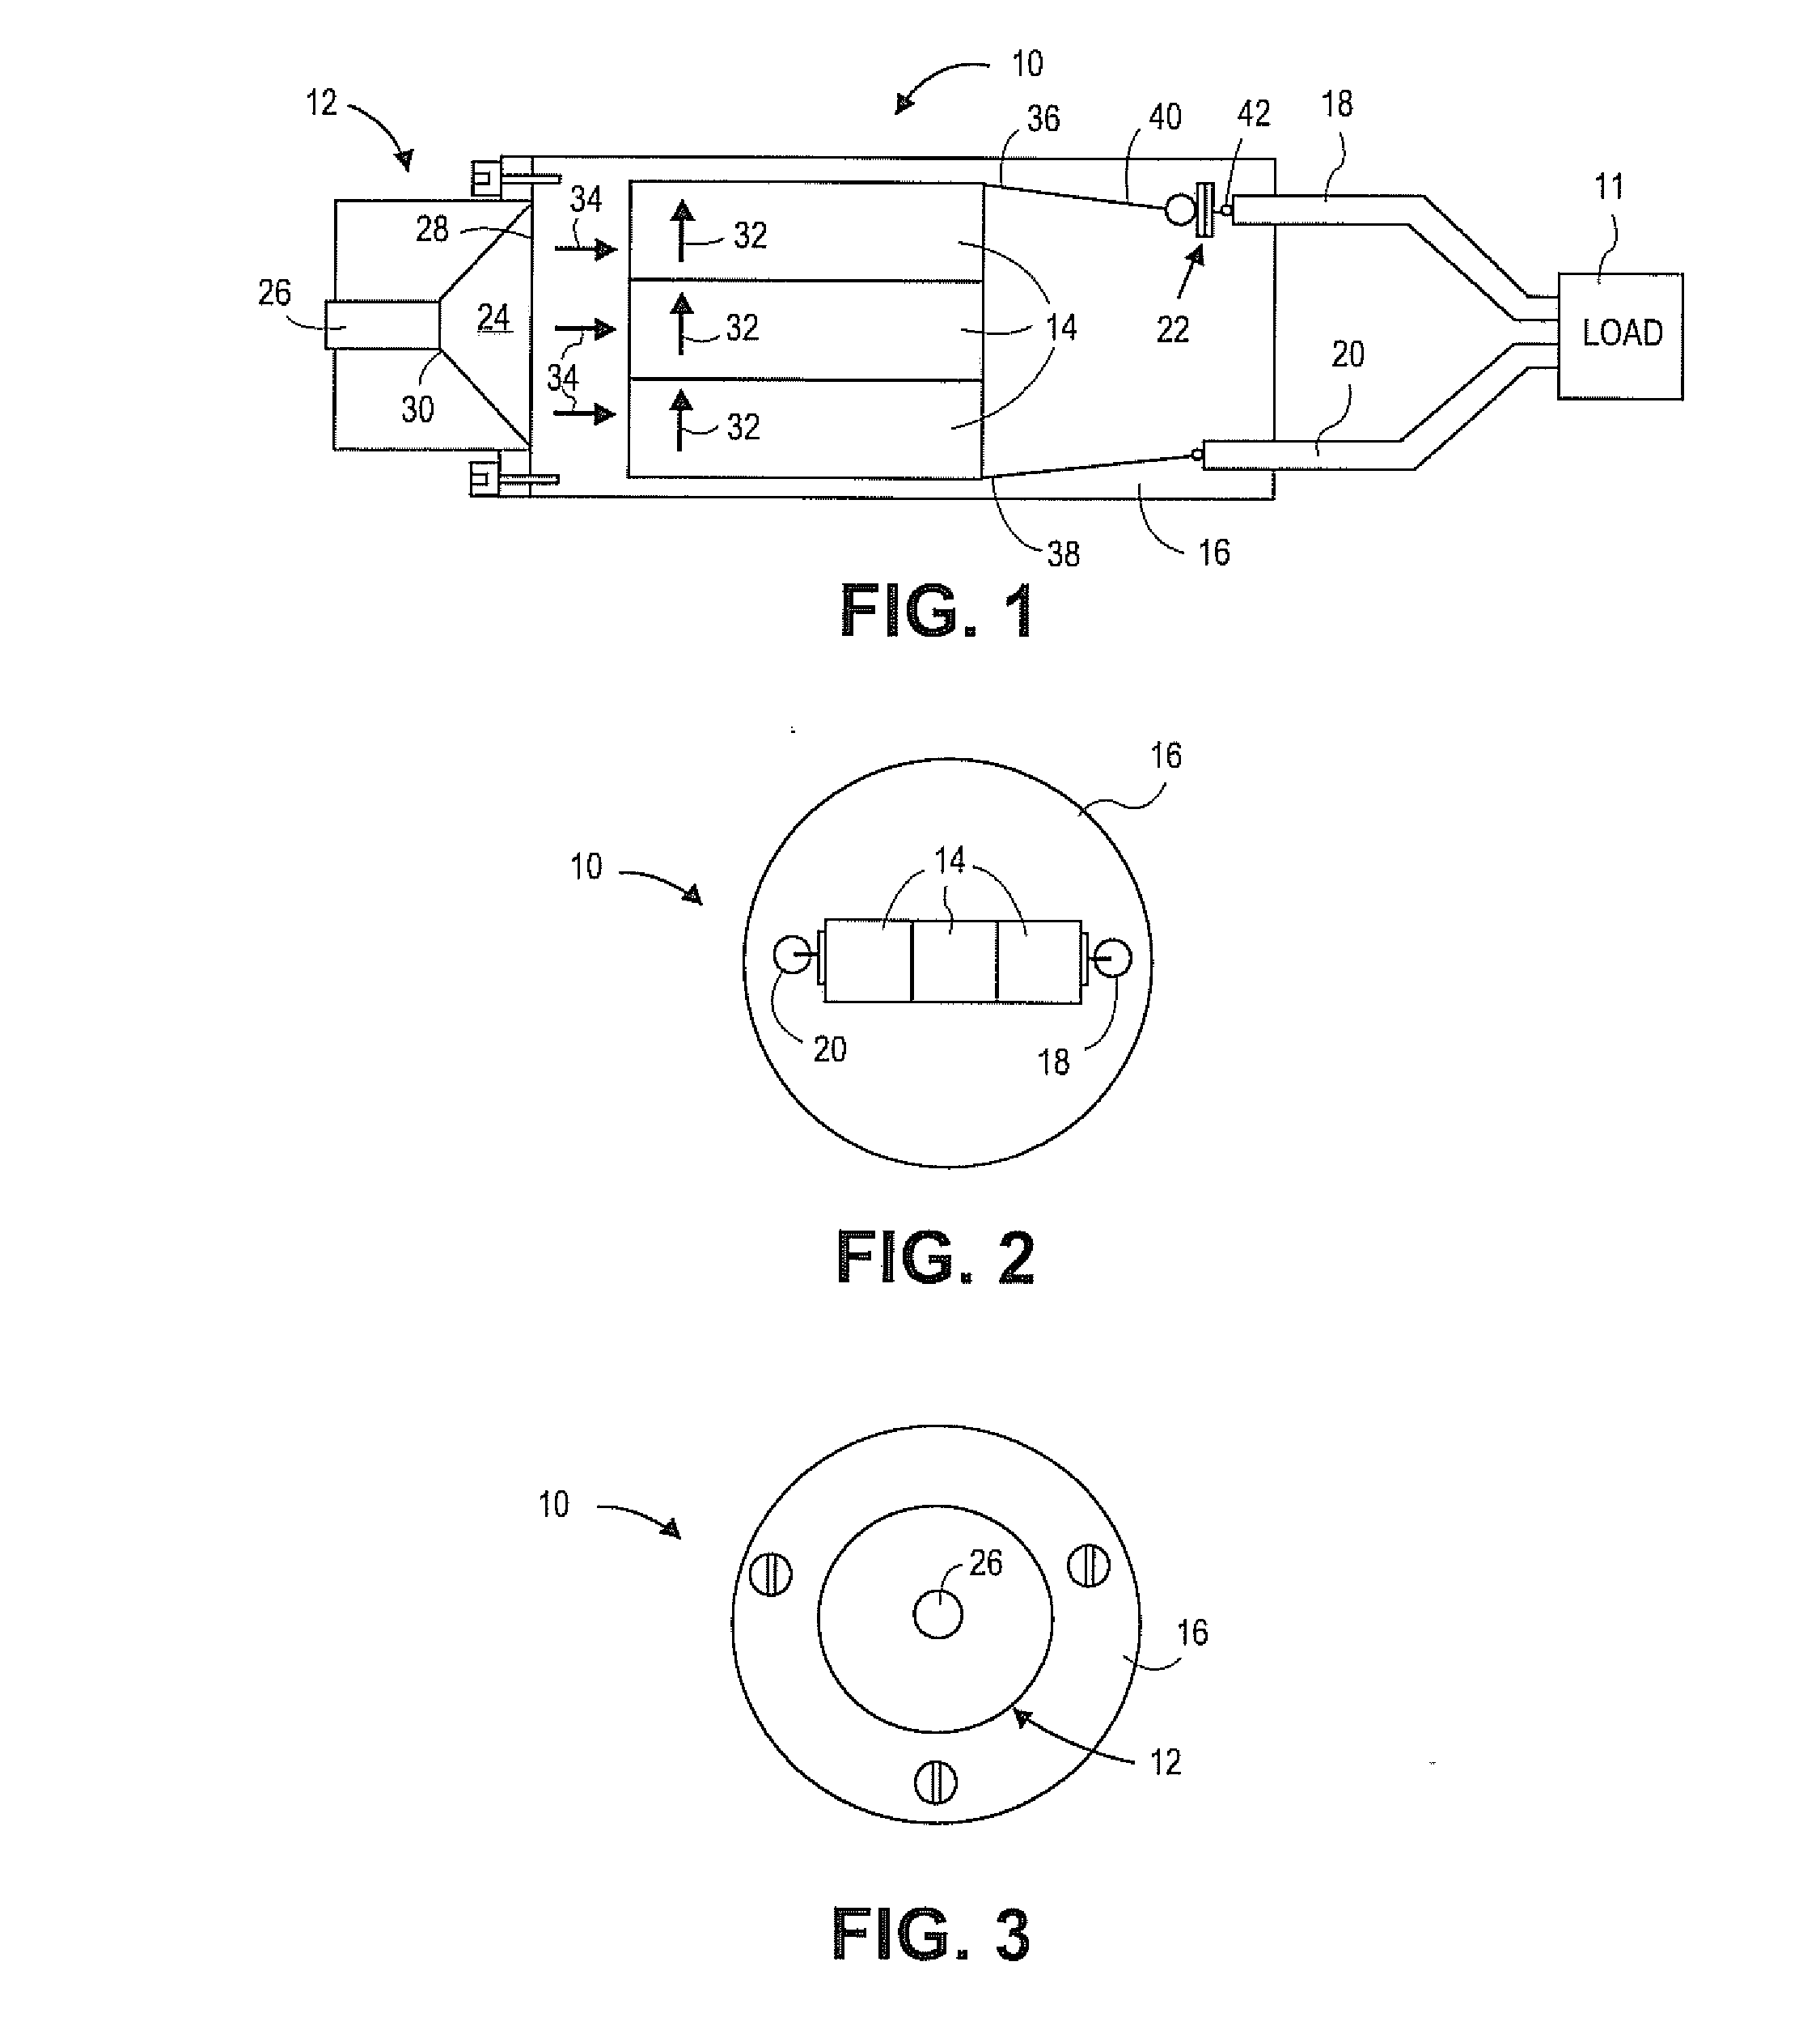 Energy generator systems with a voltage-controlled switch